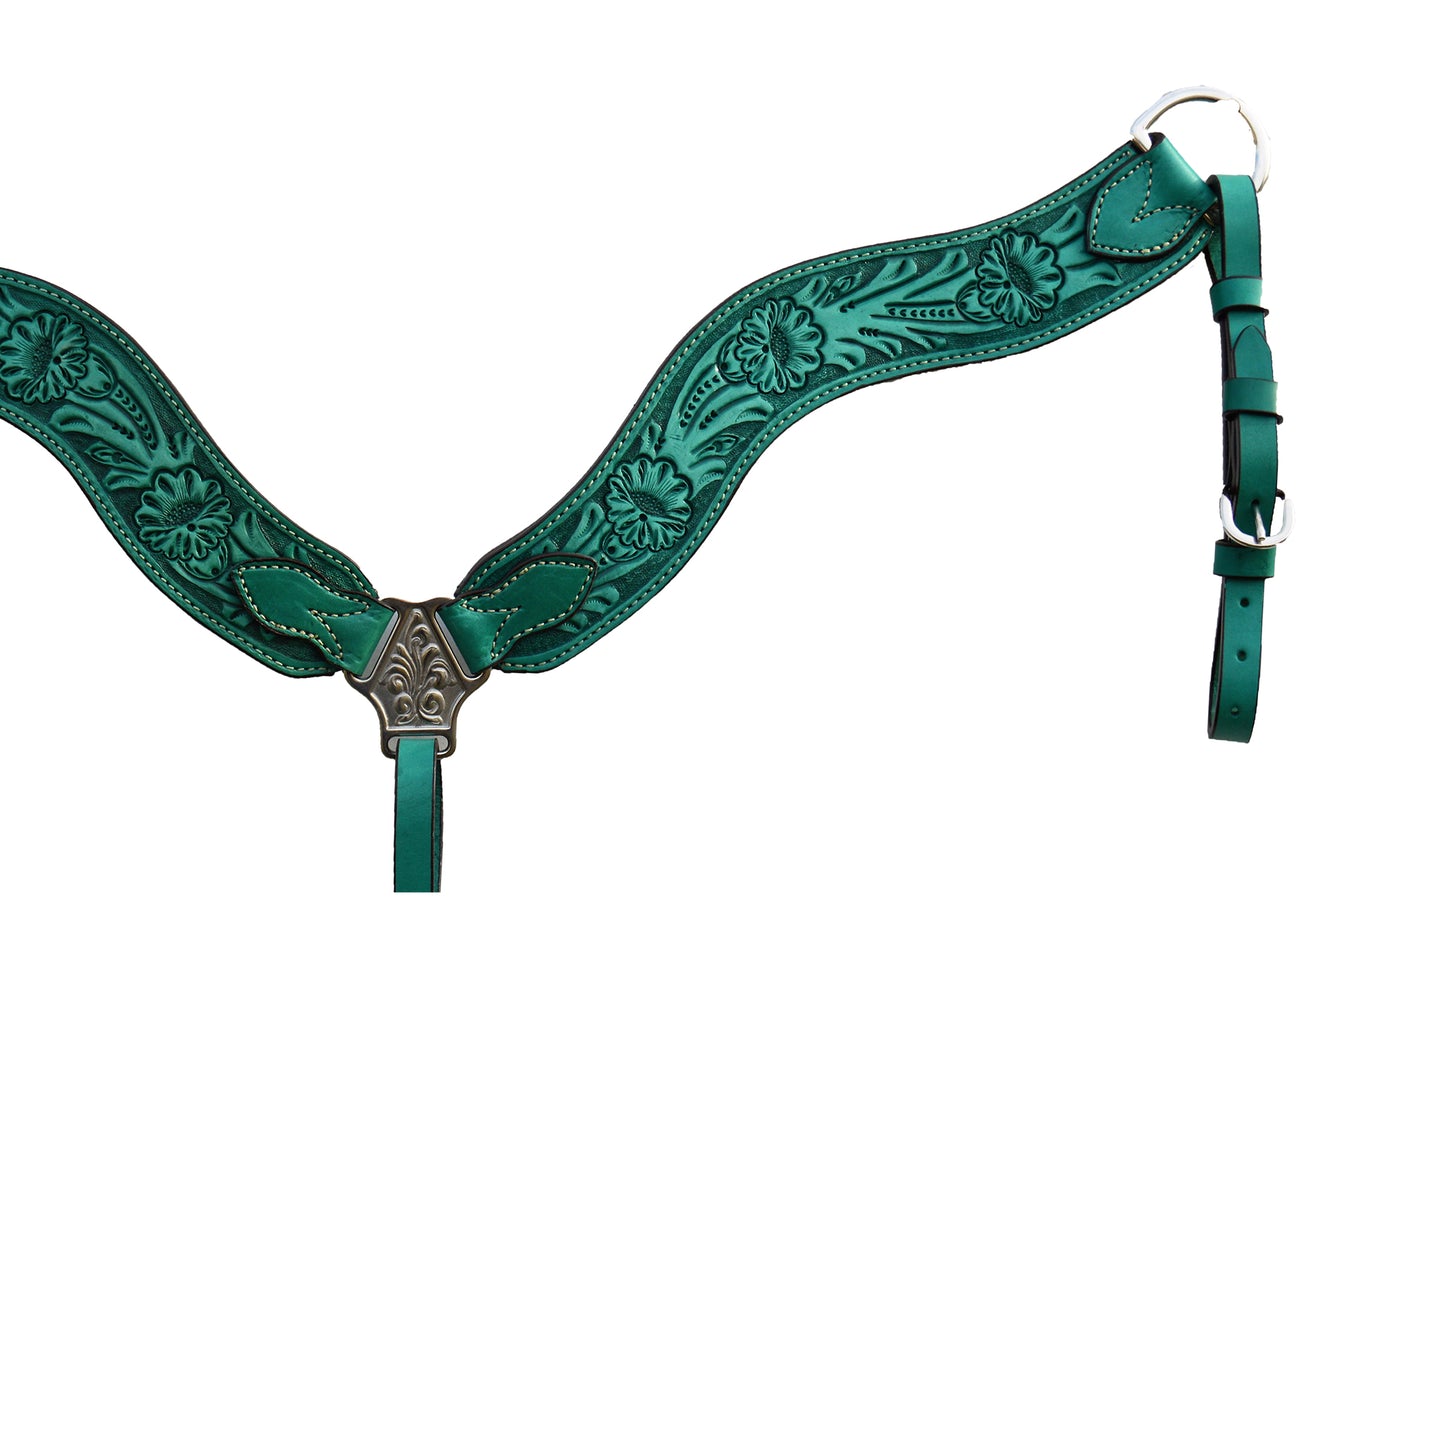 2-1/2" Wave breast collar rough out turquoise leather floral tooled (color may vary).